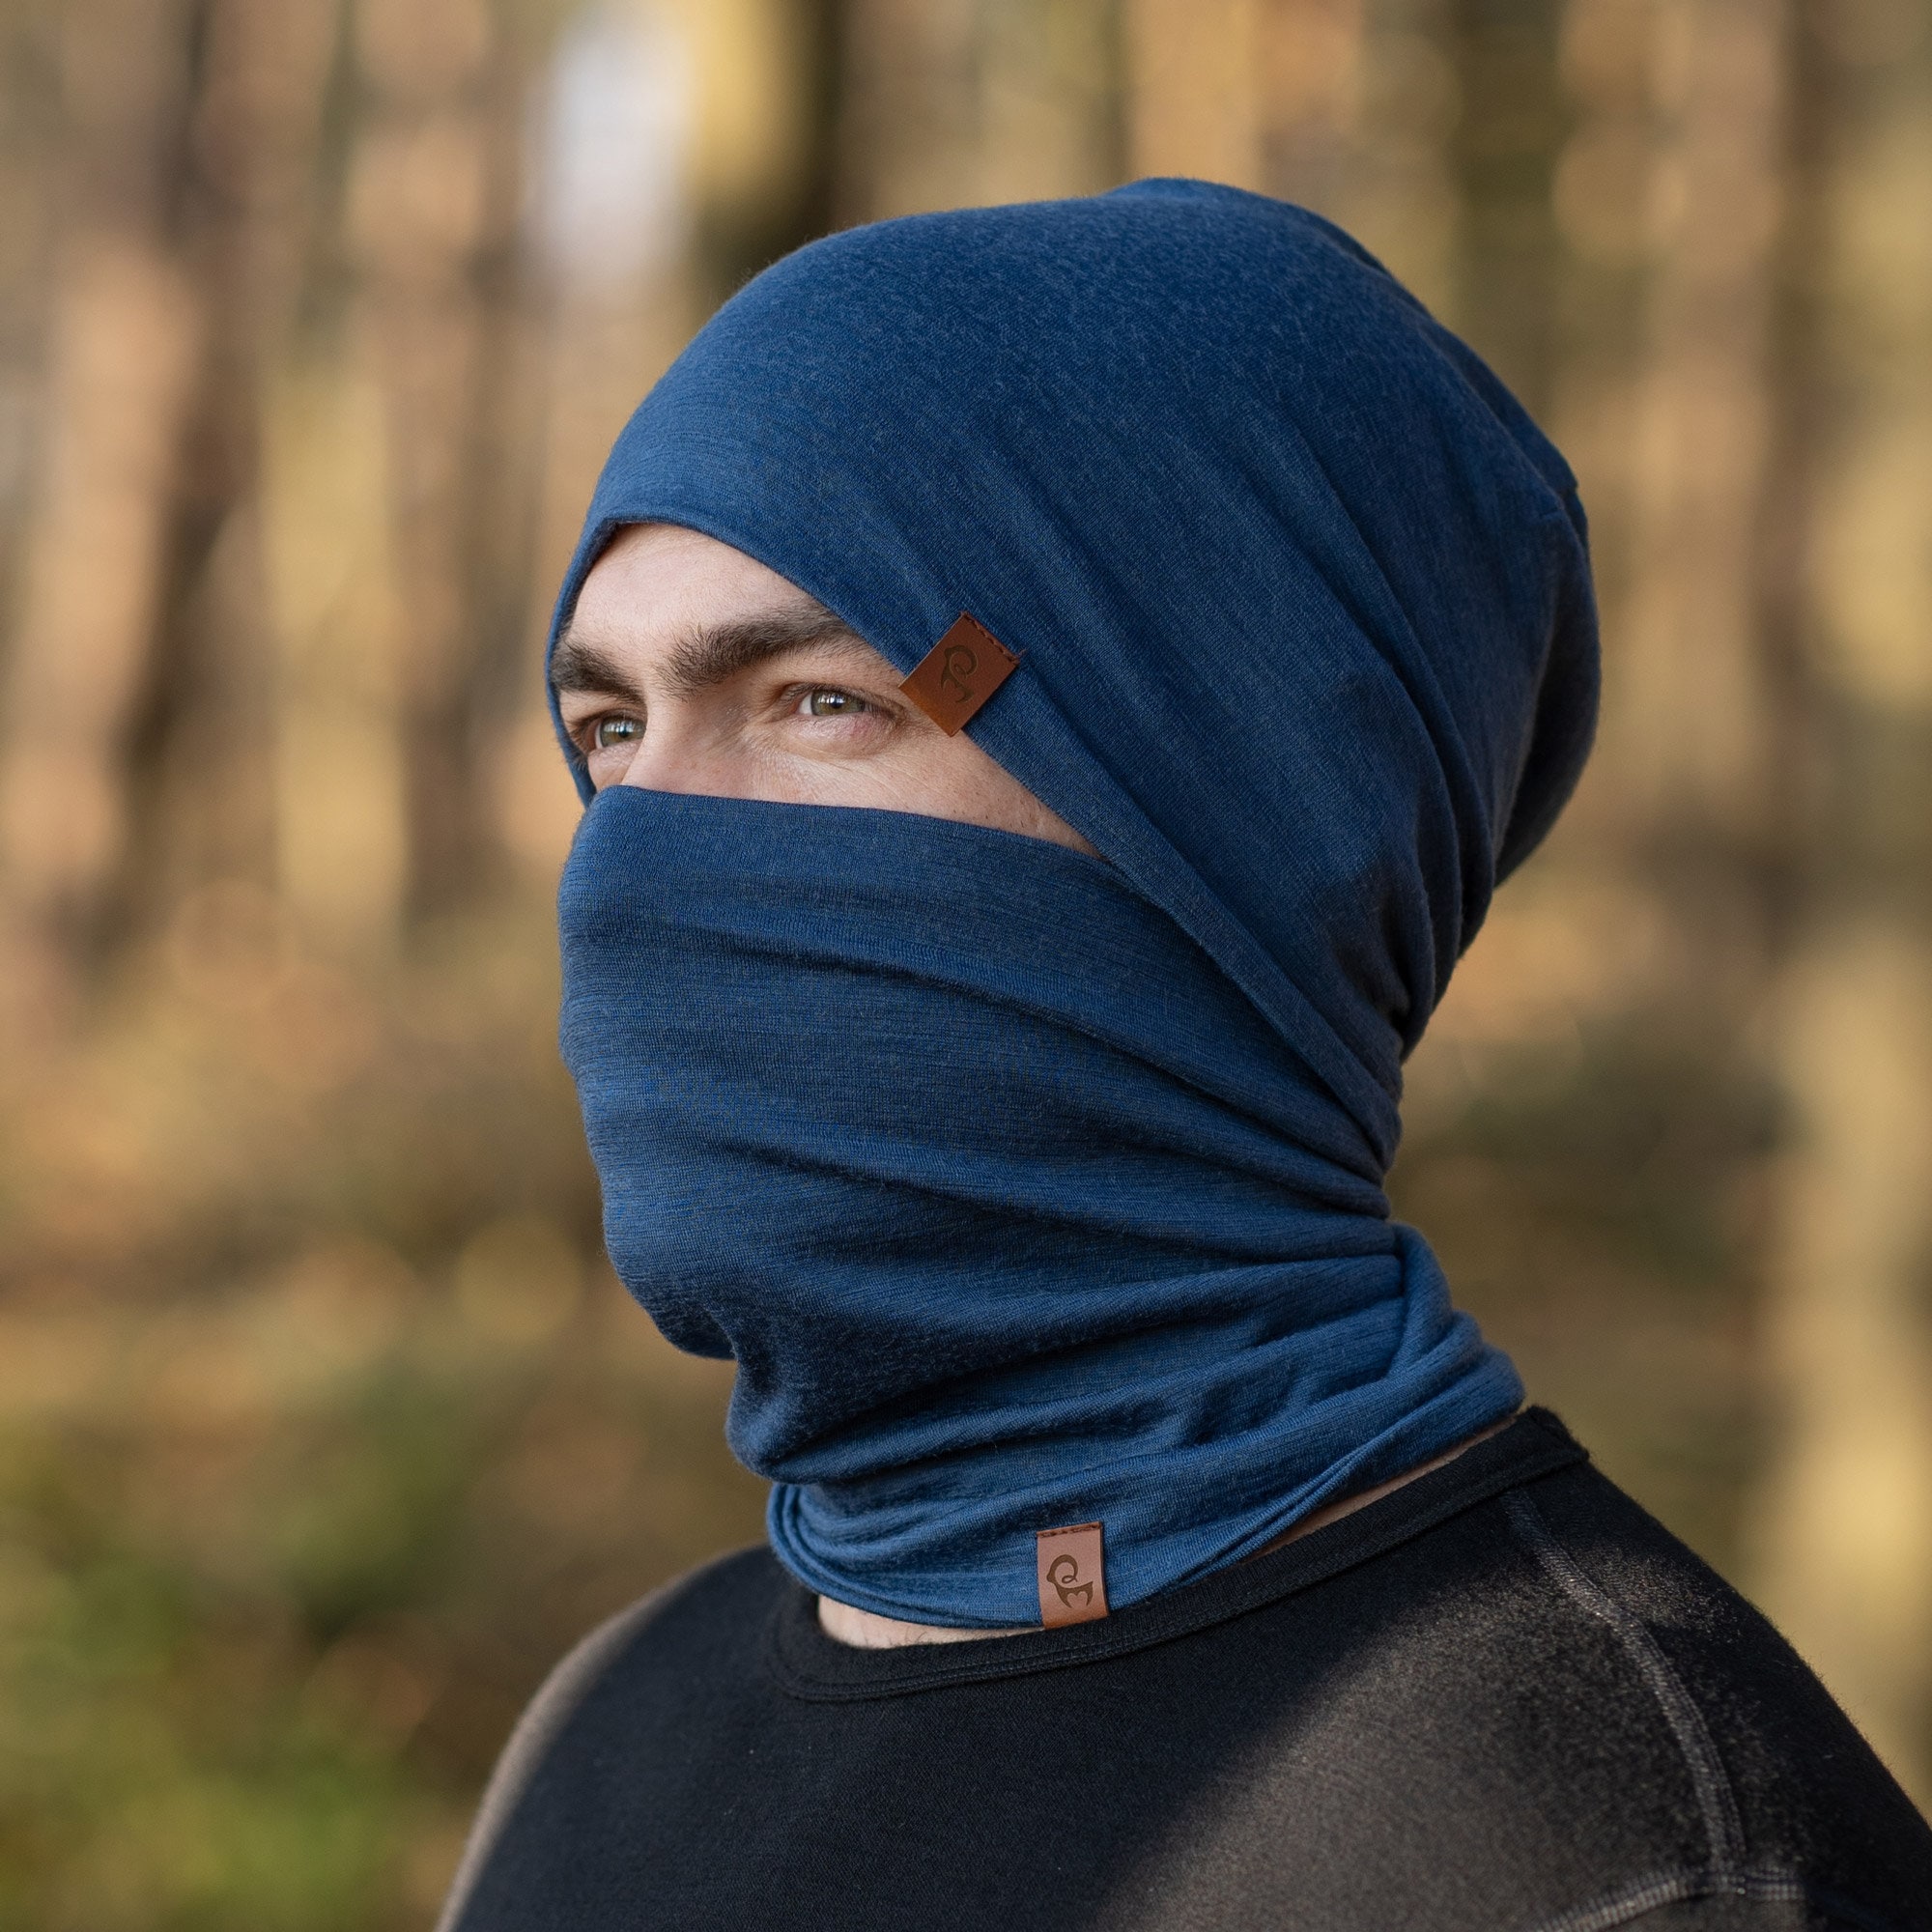 MERINO WOOL FOR MOTORCYCLISTS